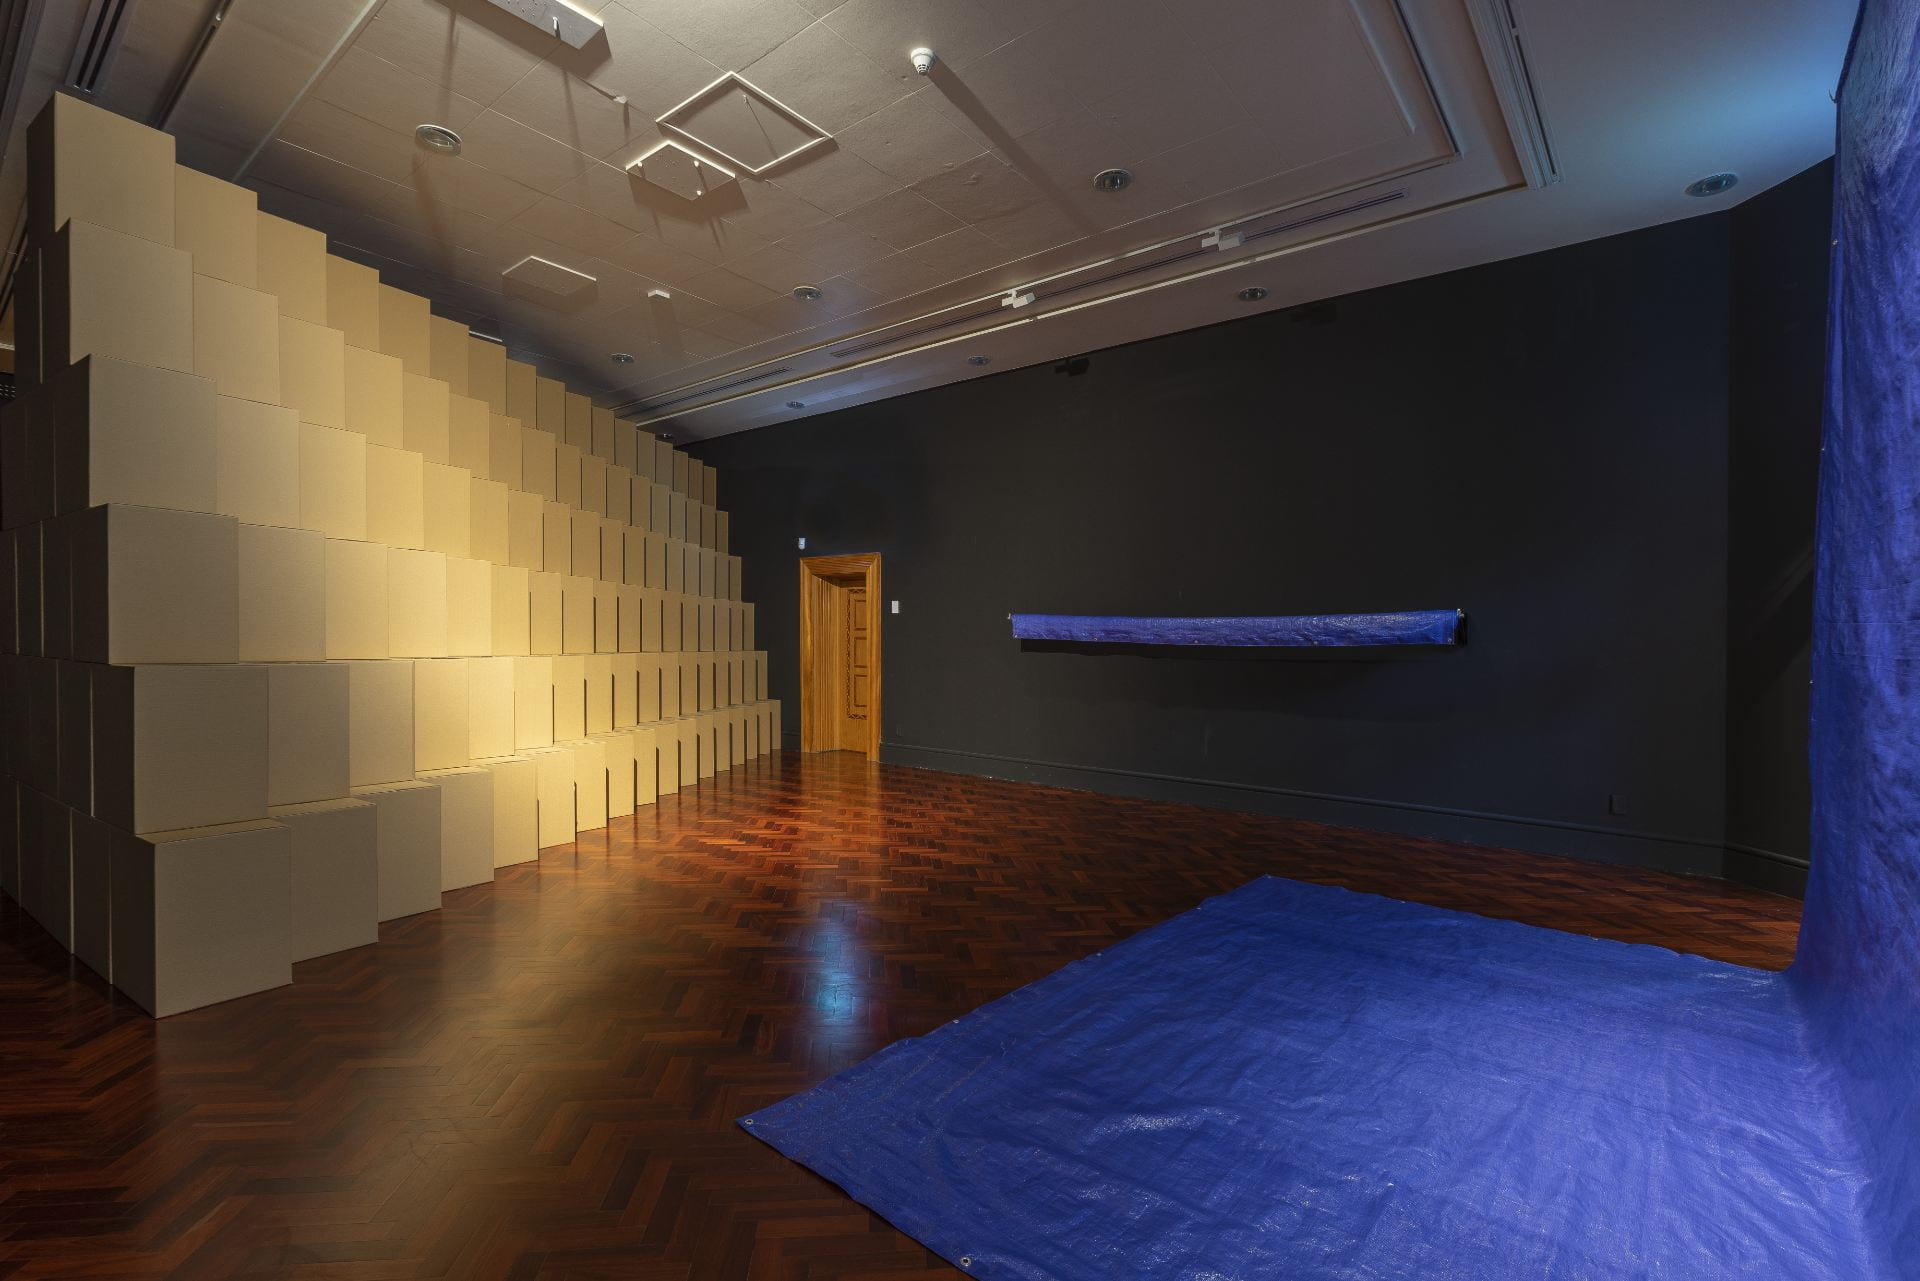 A dramatically lit gallery filled with stacked cardboard boxes in a tiered pattern. A blue tarpaulin is rolled up on one black wall, and another spreads out onto the wooden floor.